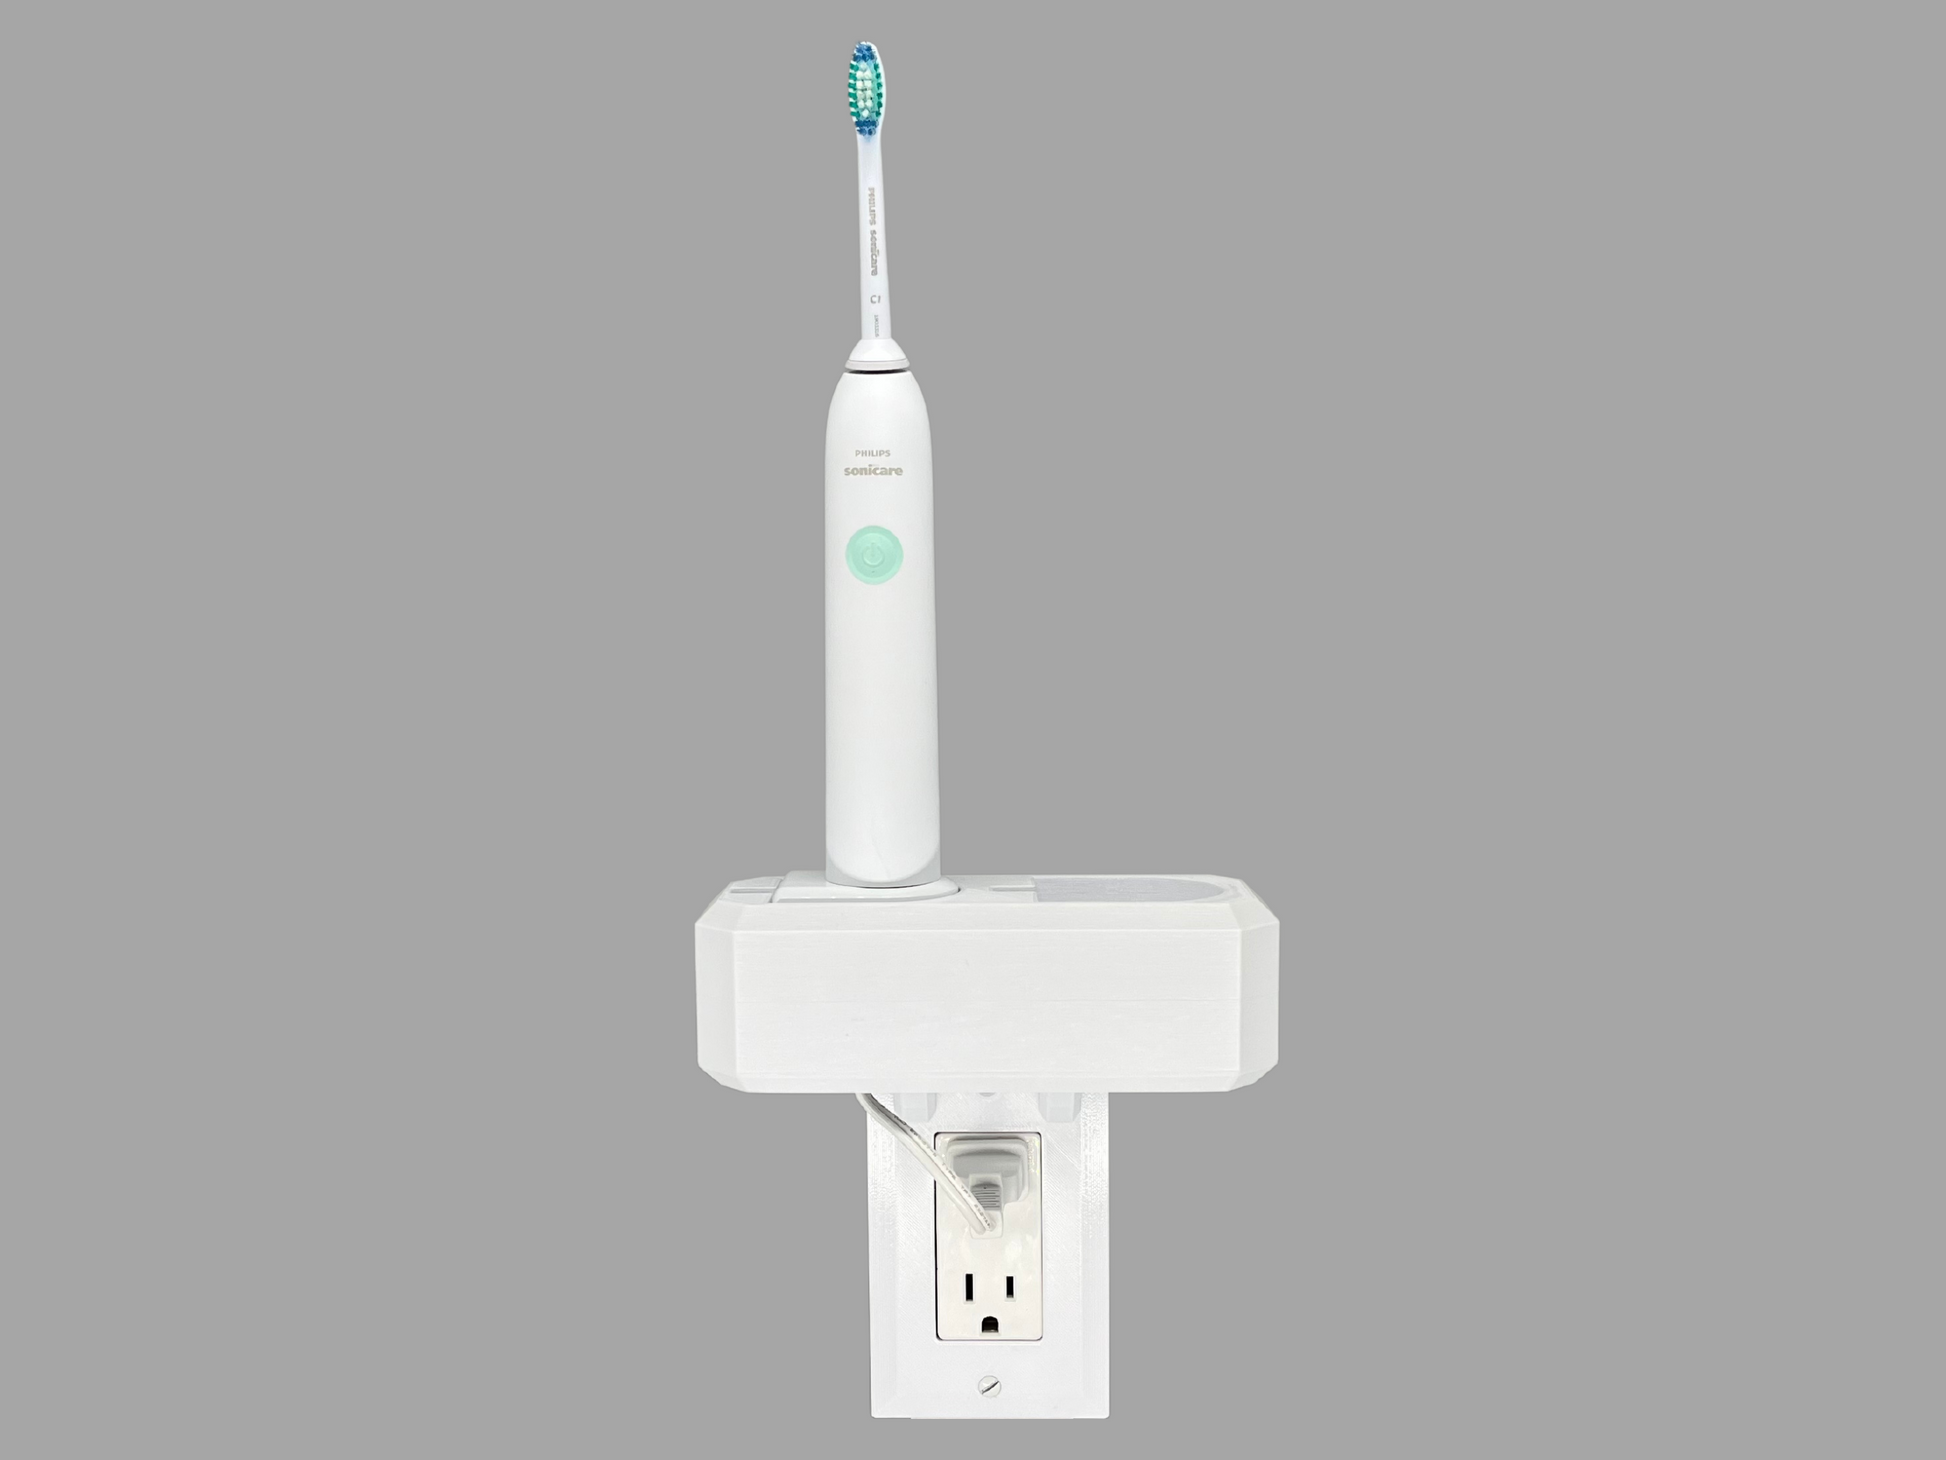 Electric toothbrush holder charger storage Oral-B Philips Sonicare Burst Diamondclean Essence iO6 iO7 iO8 iO9 Wall Outlet Mount Bathroom Cord Organizer Declutter